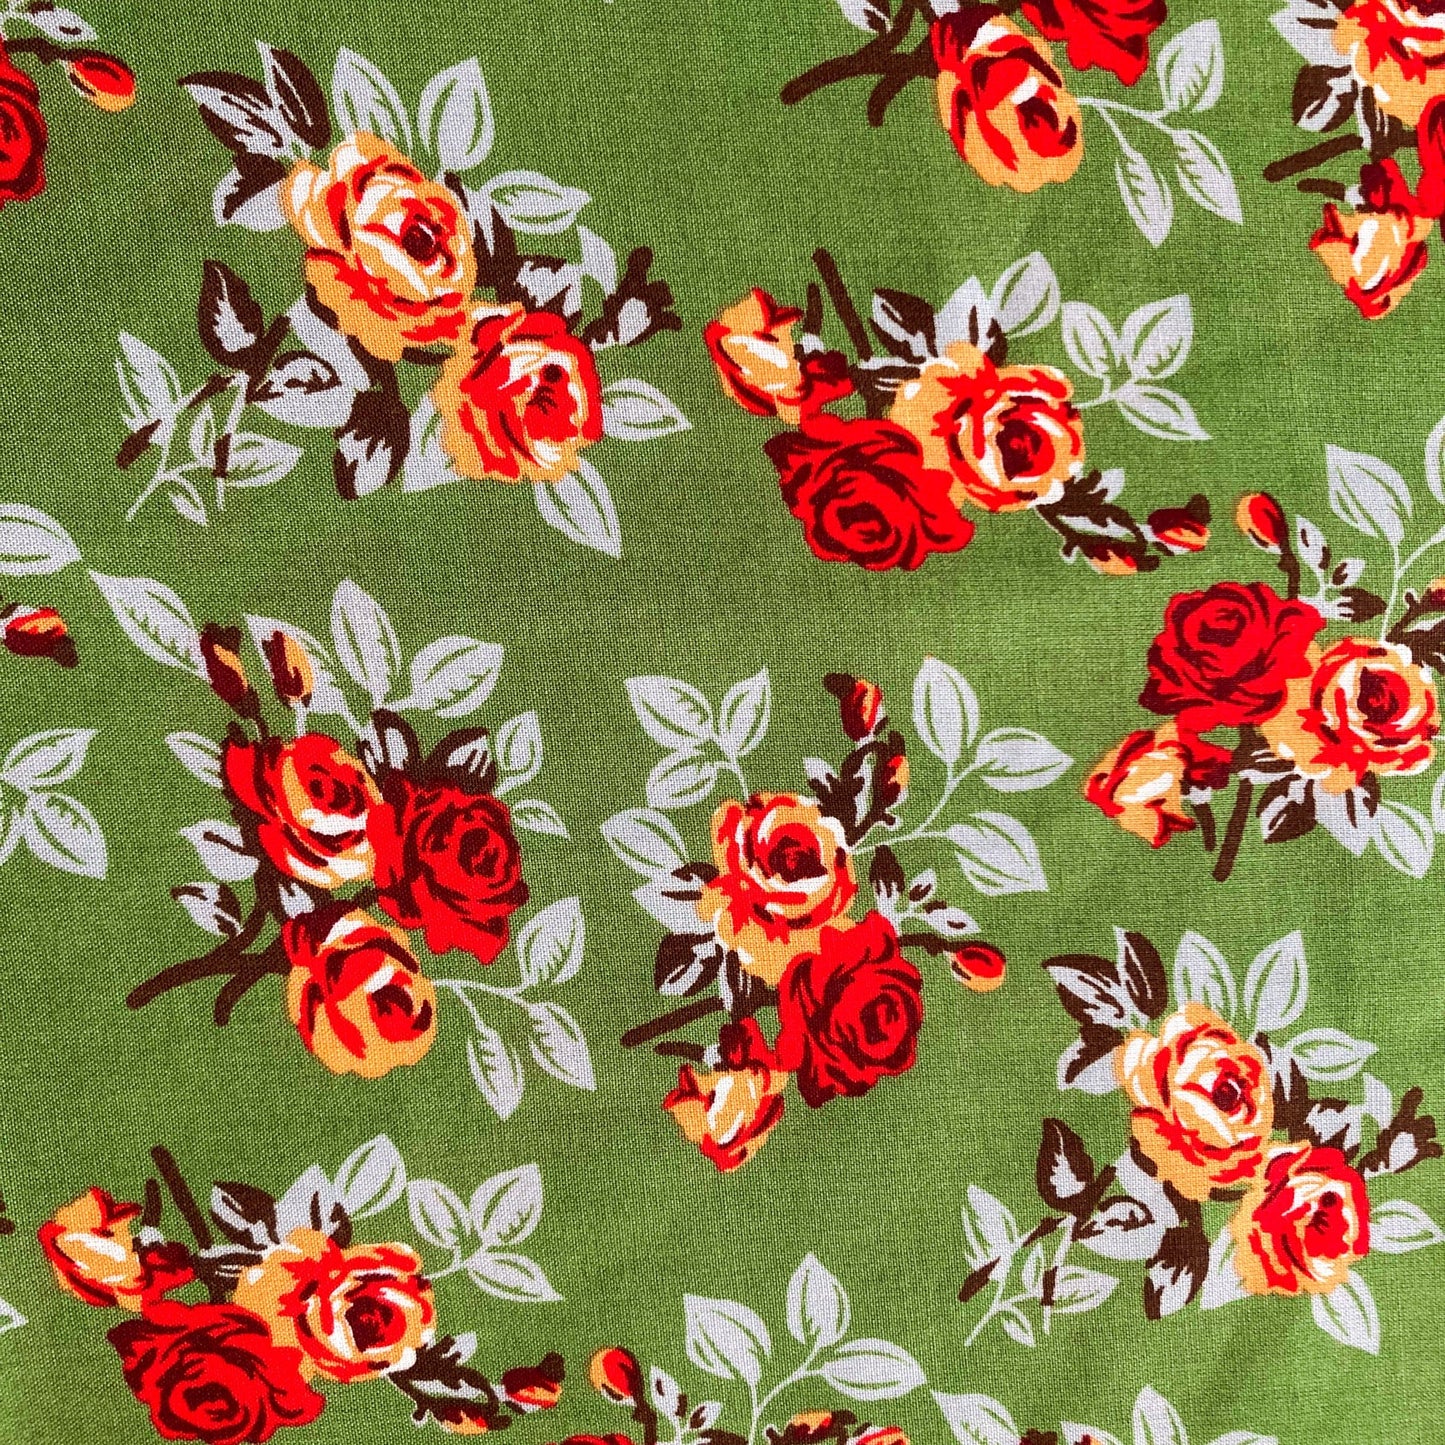 Soft Viscose in Fern Green with Vintage Style Floral Print